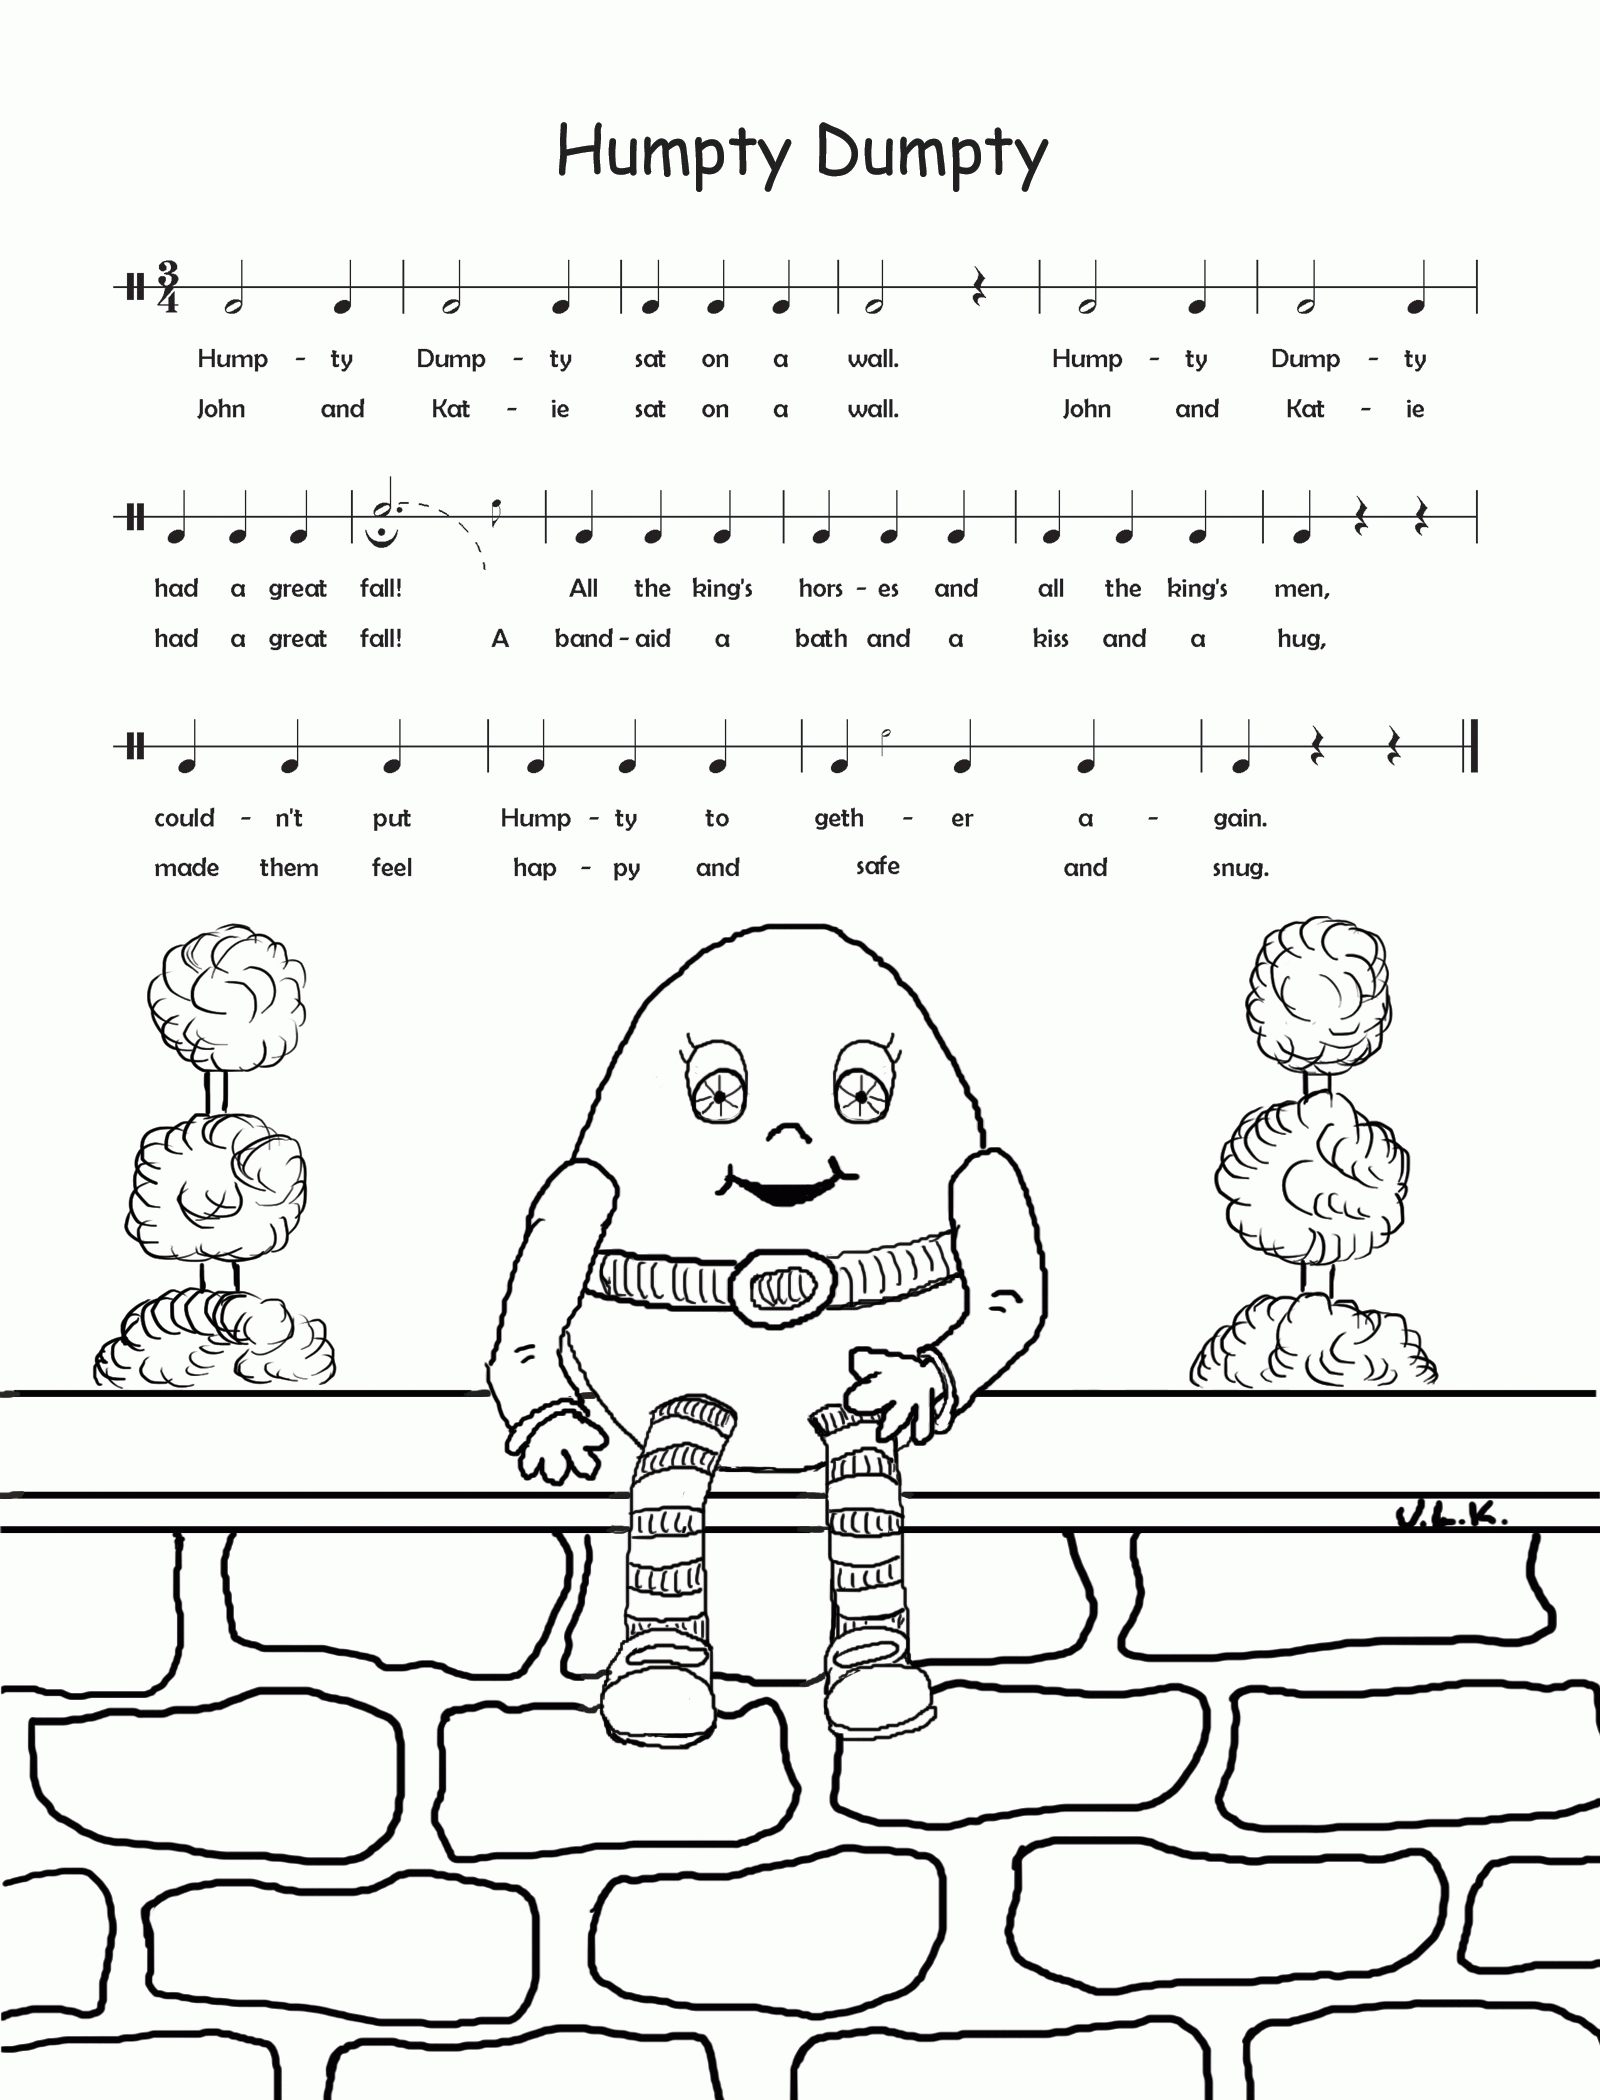 Free Downloadable Coloring Pages | Catholic Music for Kids